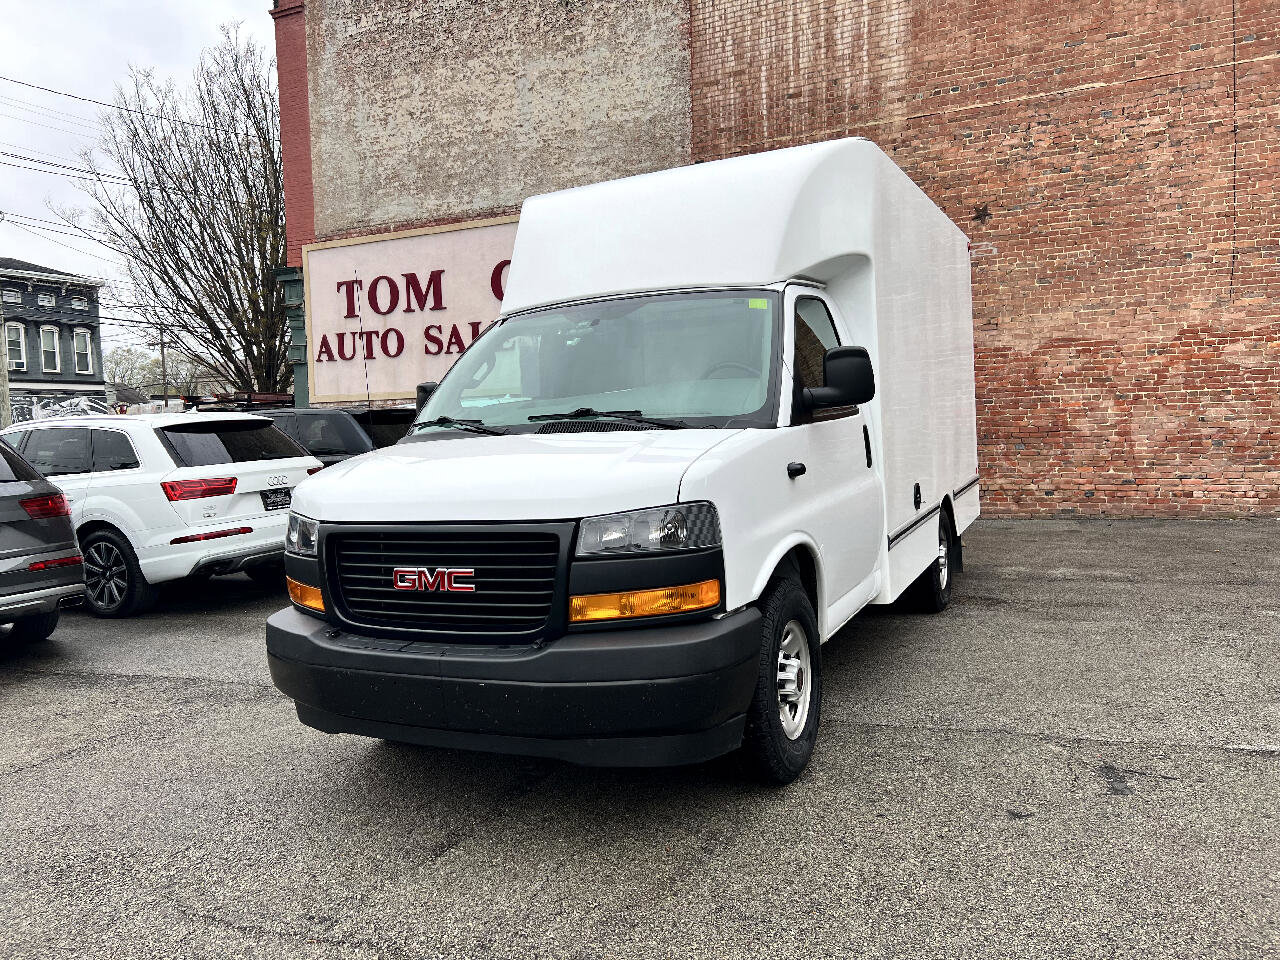 Used 2020 GMC Savana 3500 for Sale Right Now - Autotrader